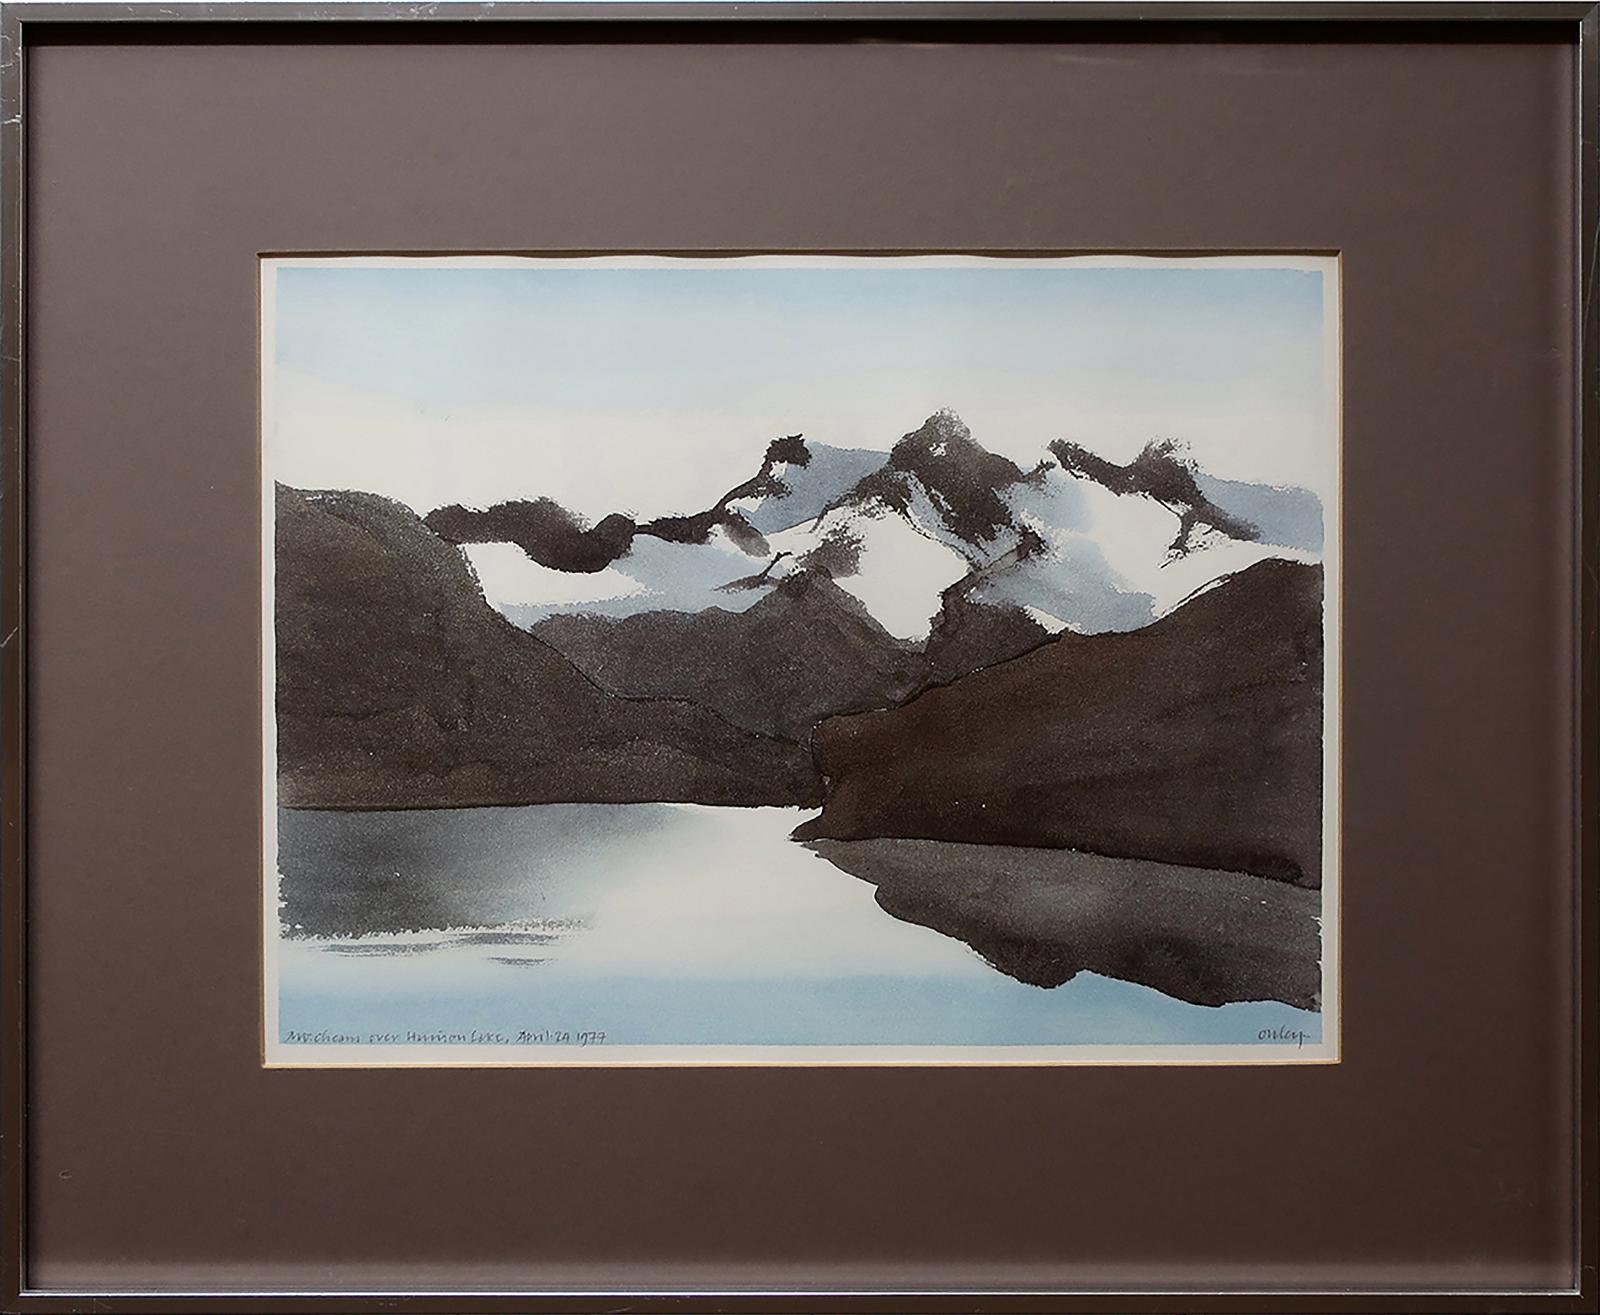 Norman Anthony (Toni) Onley (1928-2004) - Mt. Cheam Over Harrison Lake